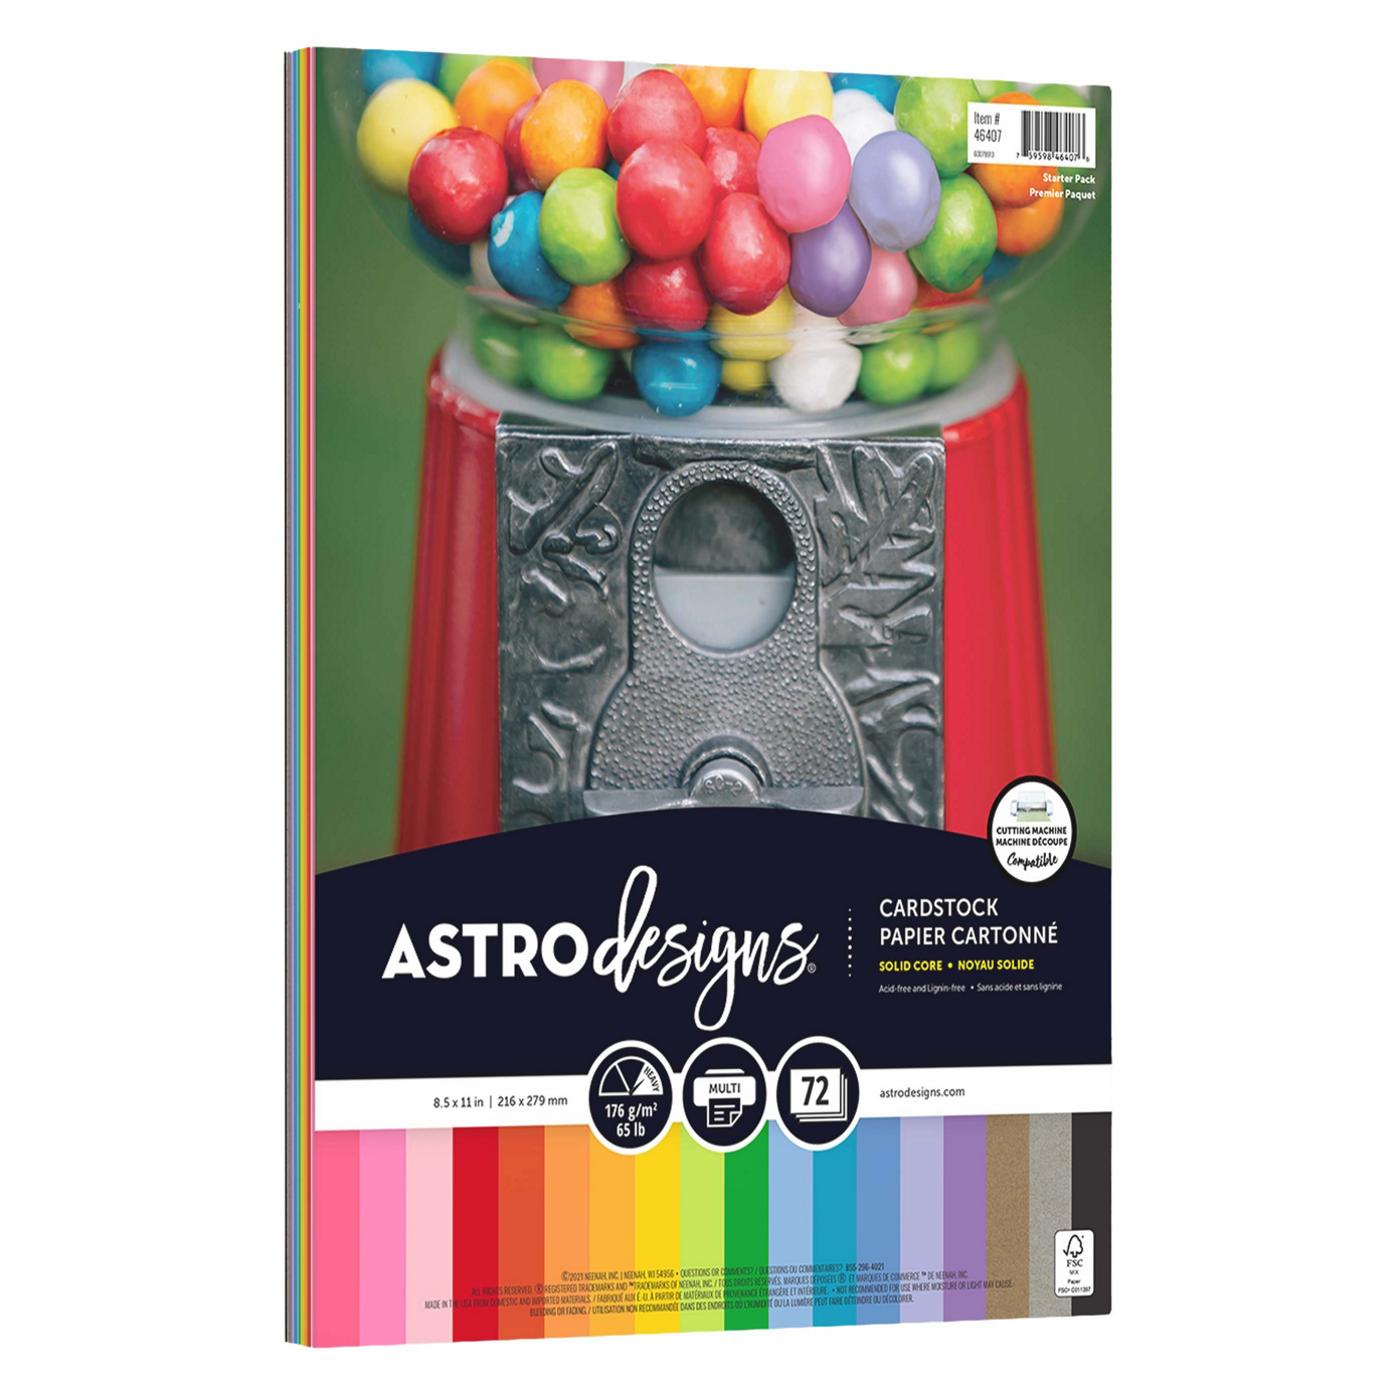 Astrodesigns Cardstock Paper - Multi Color, 72 Ct; image 1 of 2